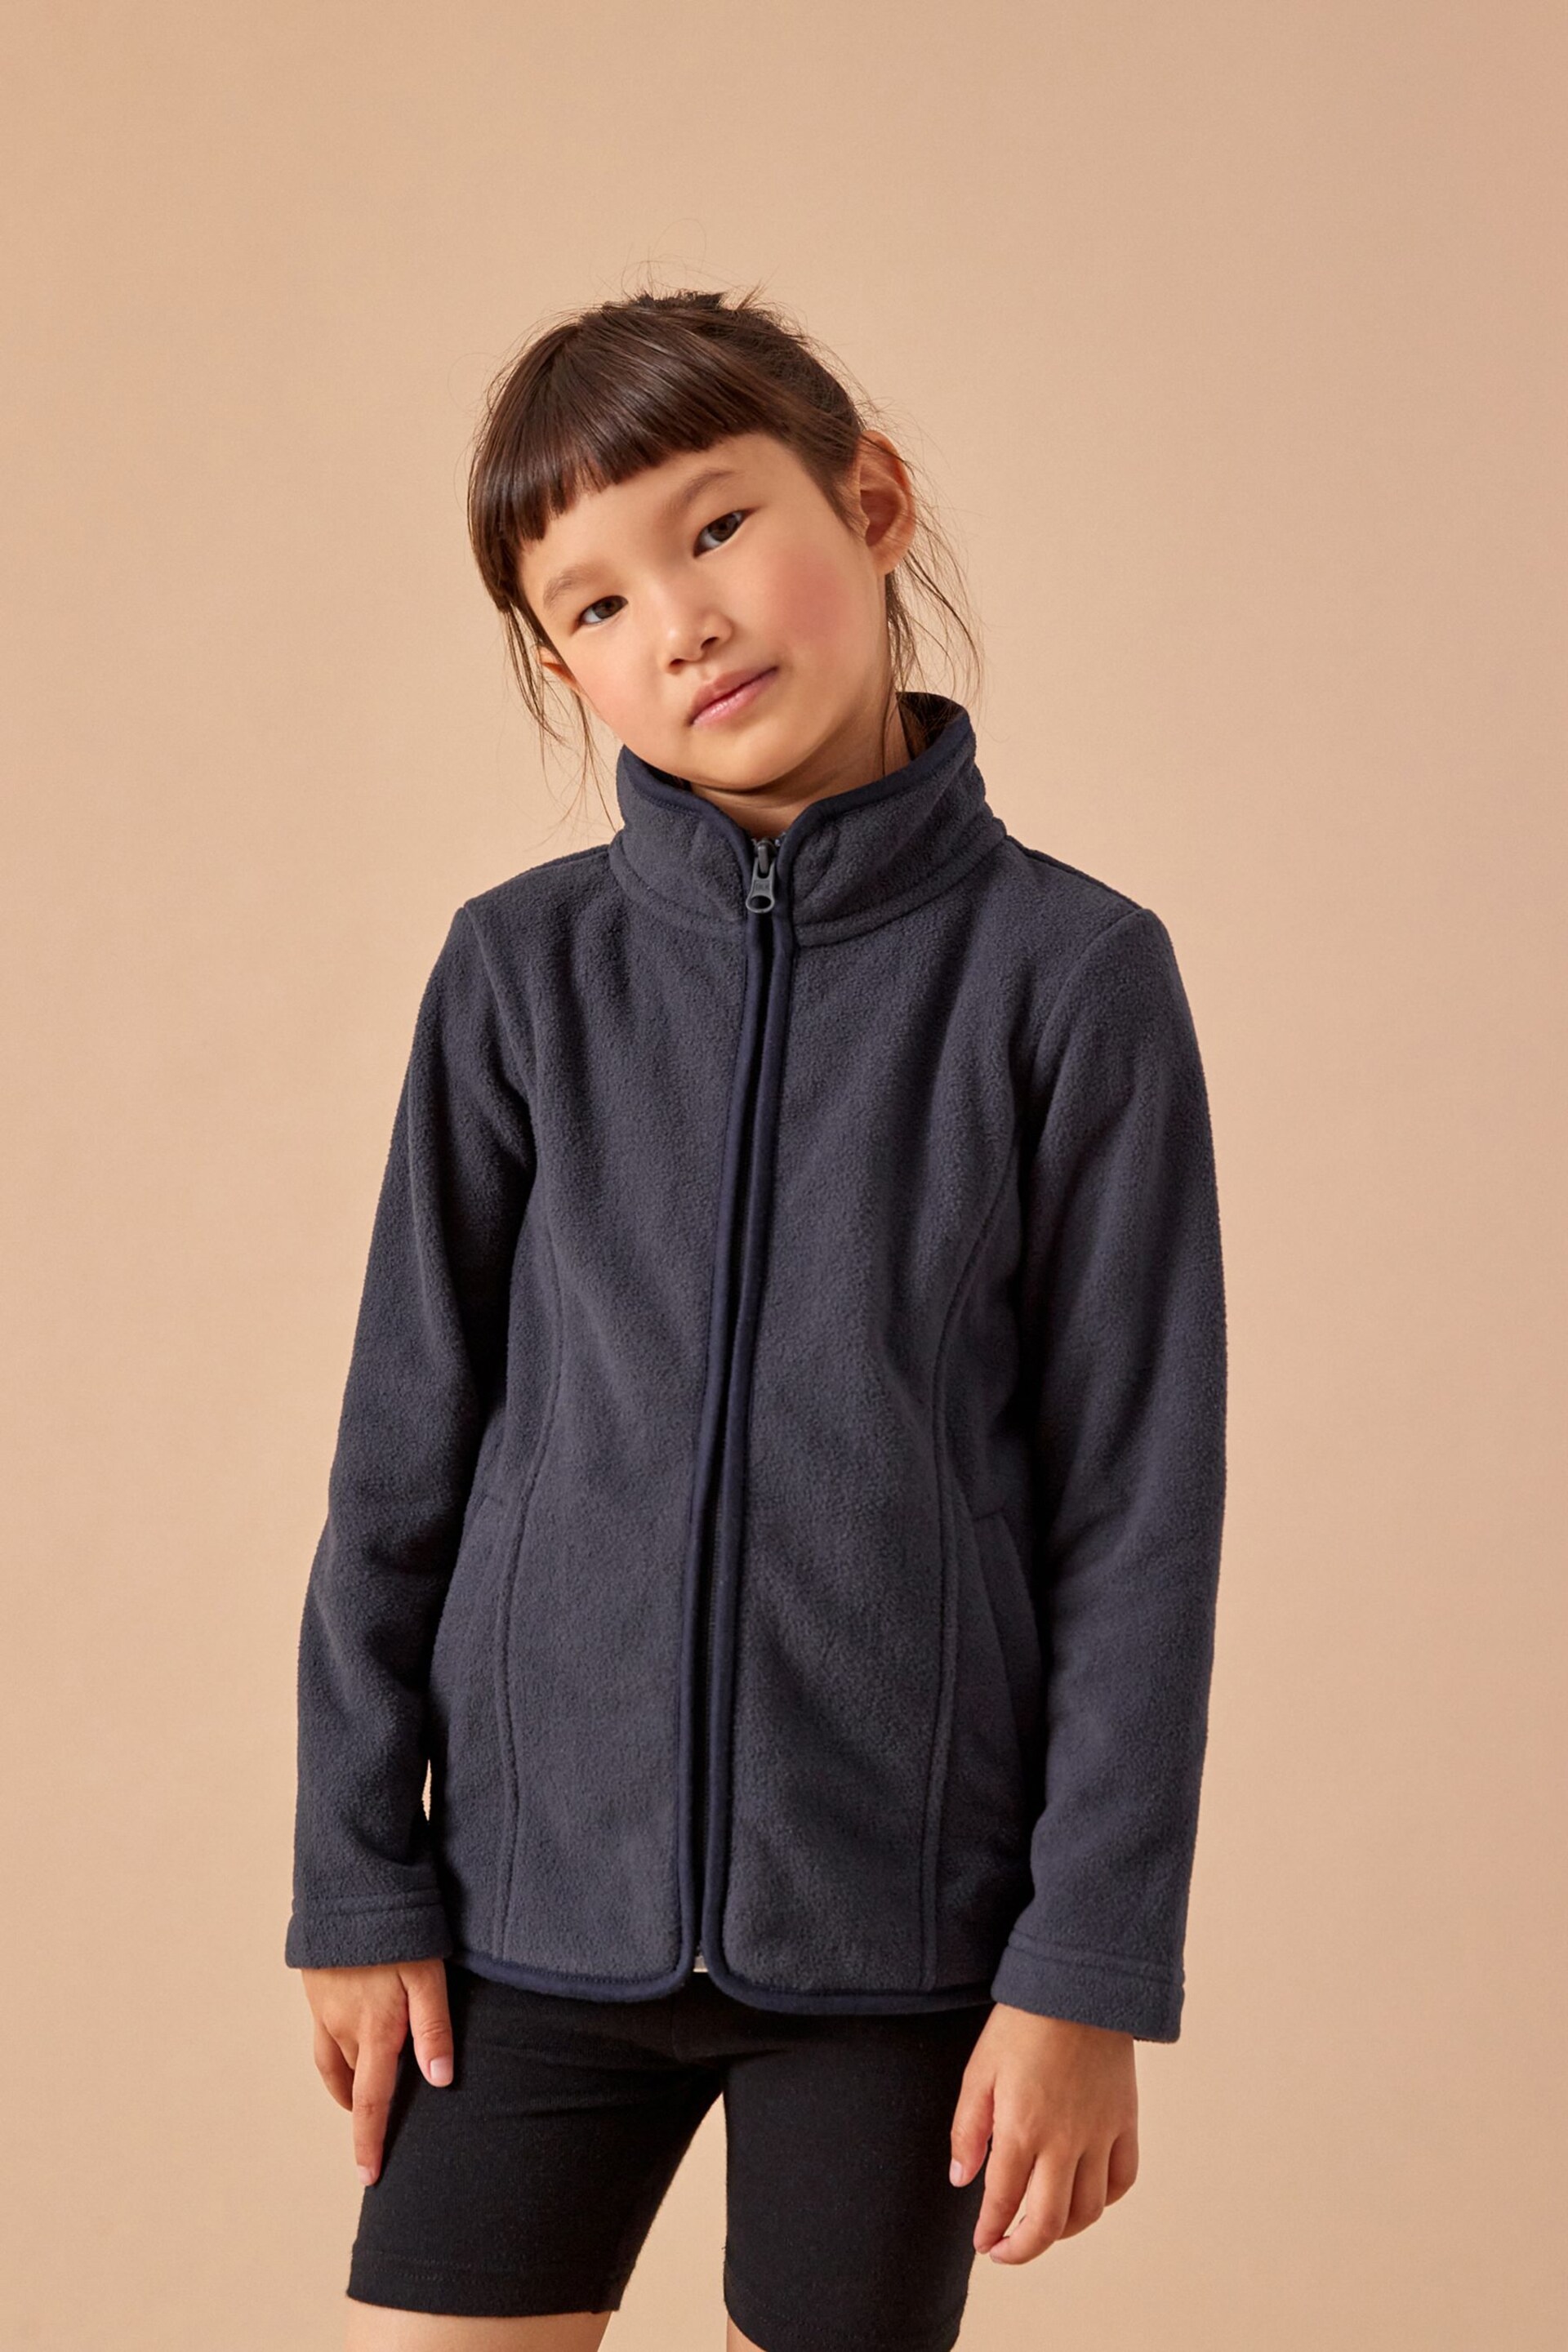 Navy Blue Zip-Up Fleece Jacket With Pockets (3-16yrs) - Image 1 of 6